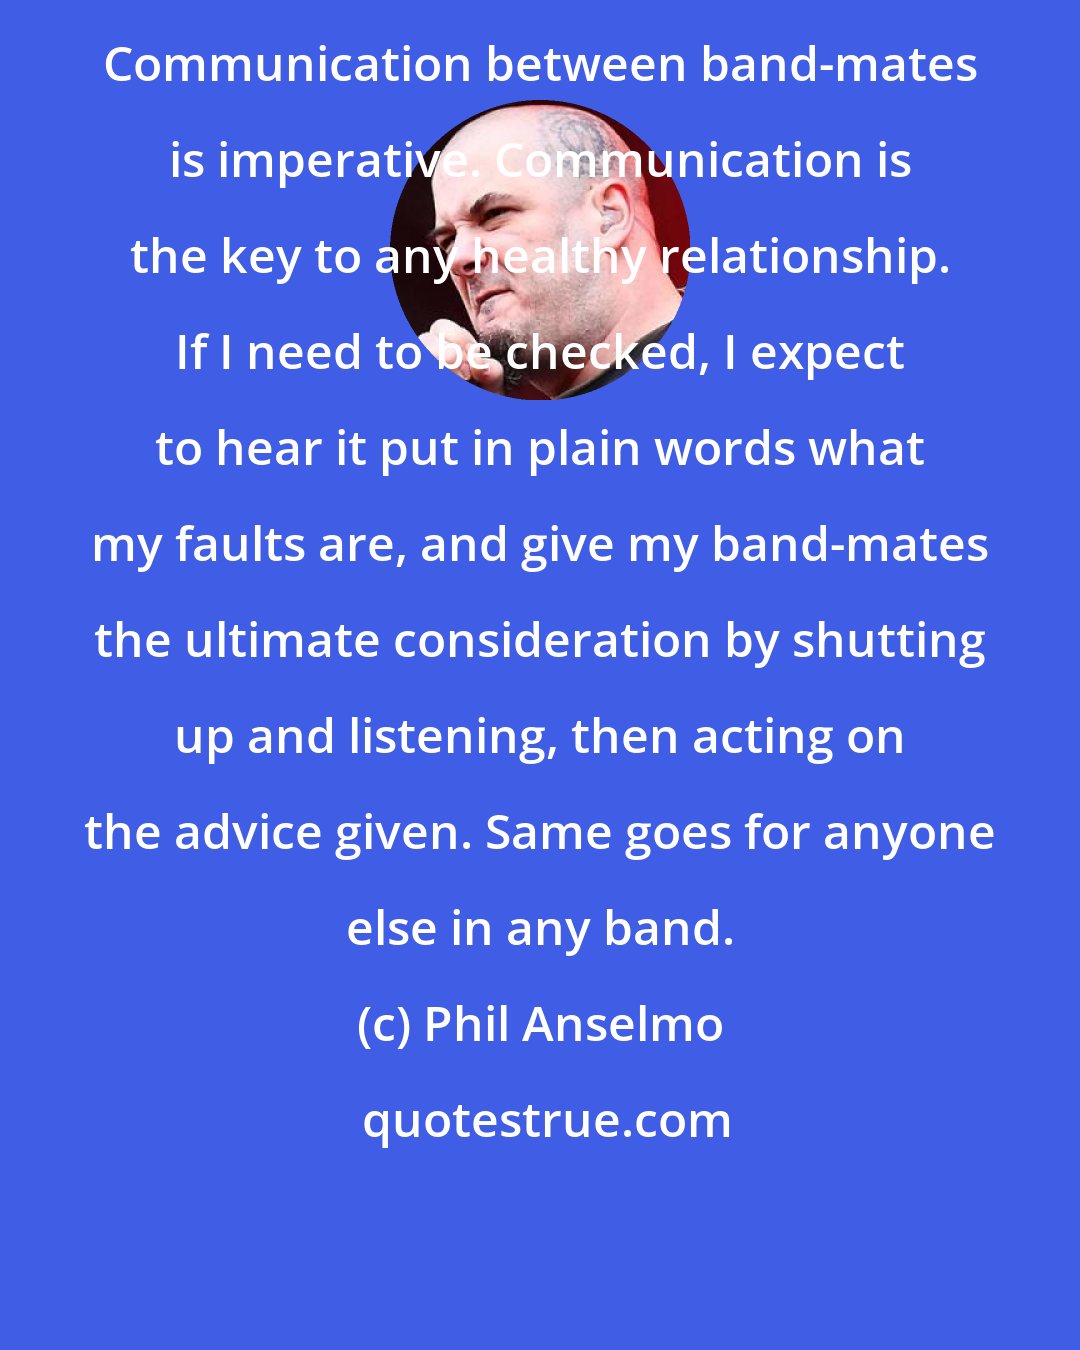 Phil Anselmo: Communication between band-mates is imperative. Communication is the key to any healthy relationship. If I need to be checked, I expect to hear it put in plain words what my faults are, and give my band-mates the ultimate consideration by shutting up and listening, then acting on the advice given. Same goes for anyone else in any band.